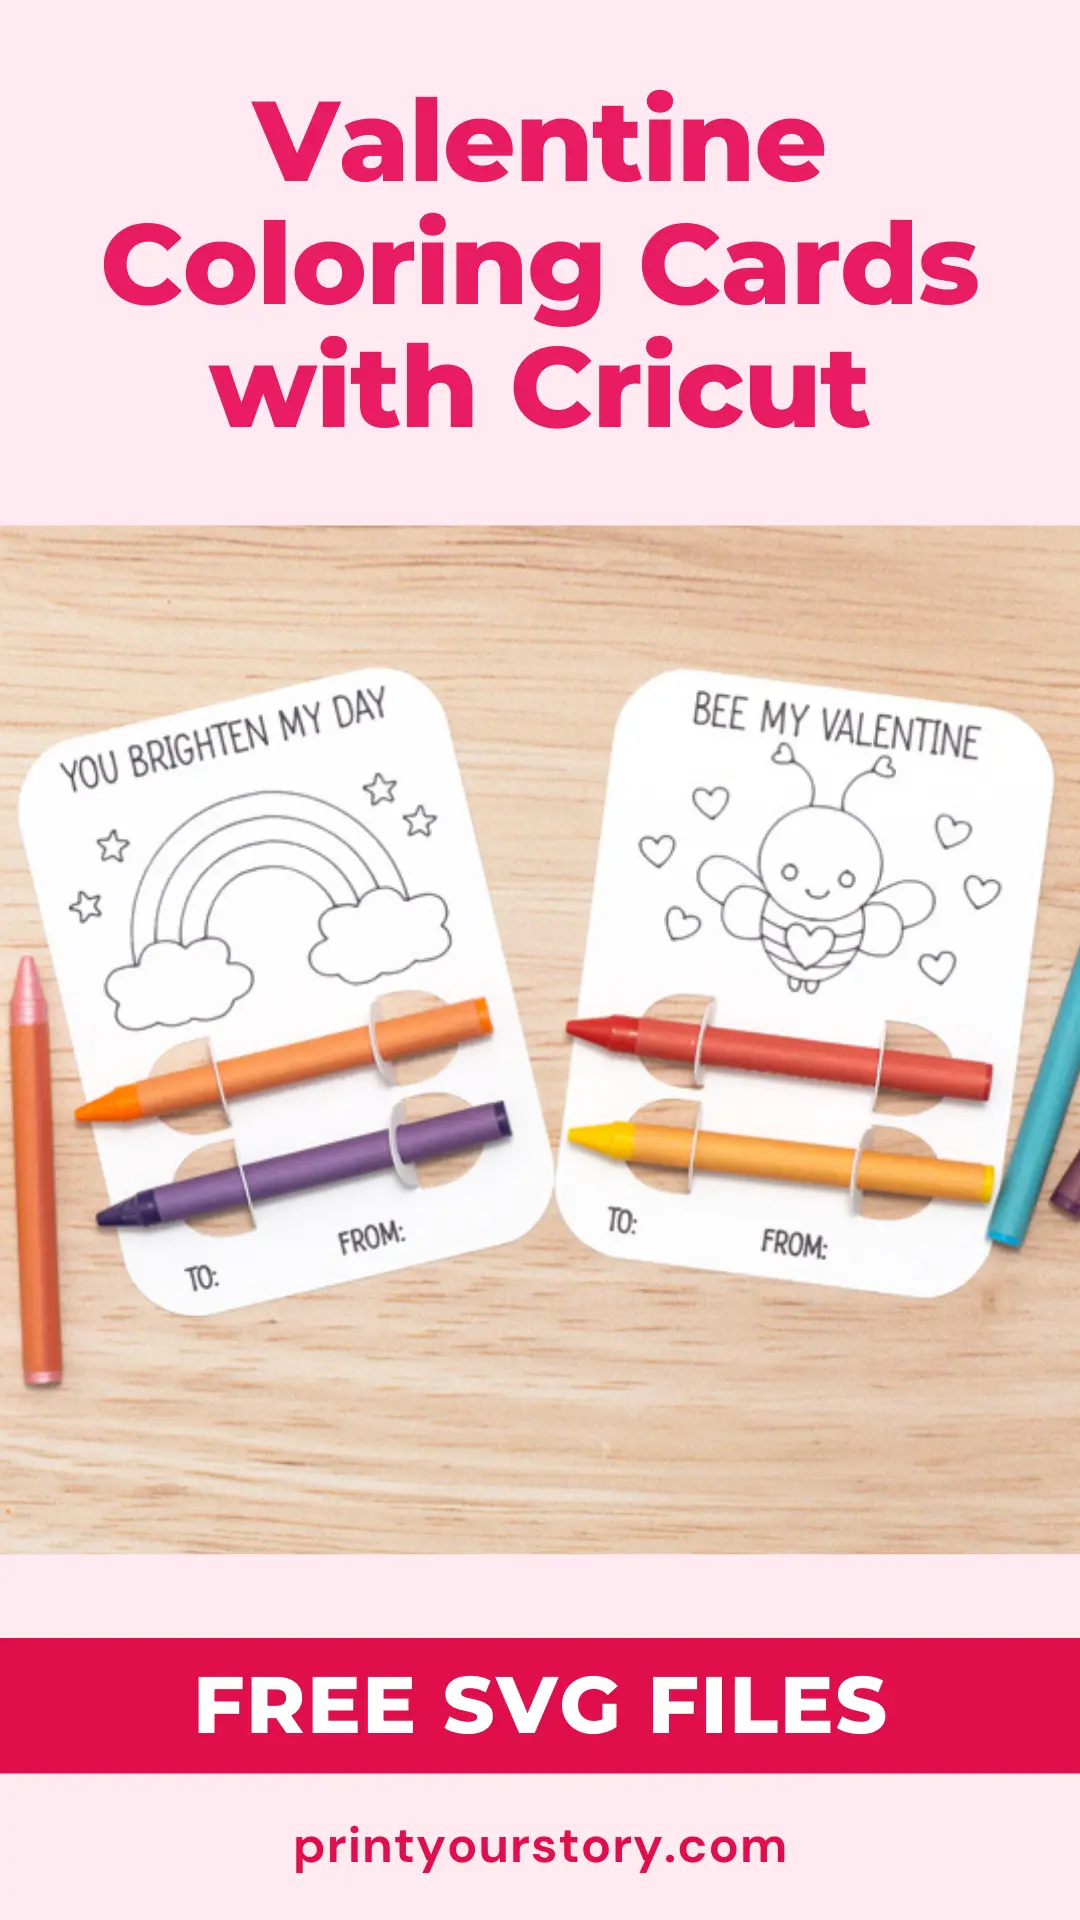 Free Valentine Coloring Card SVG files for Cricut